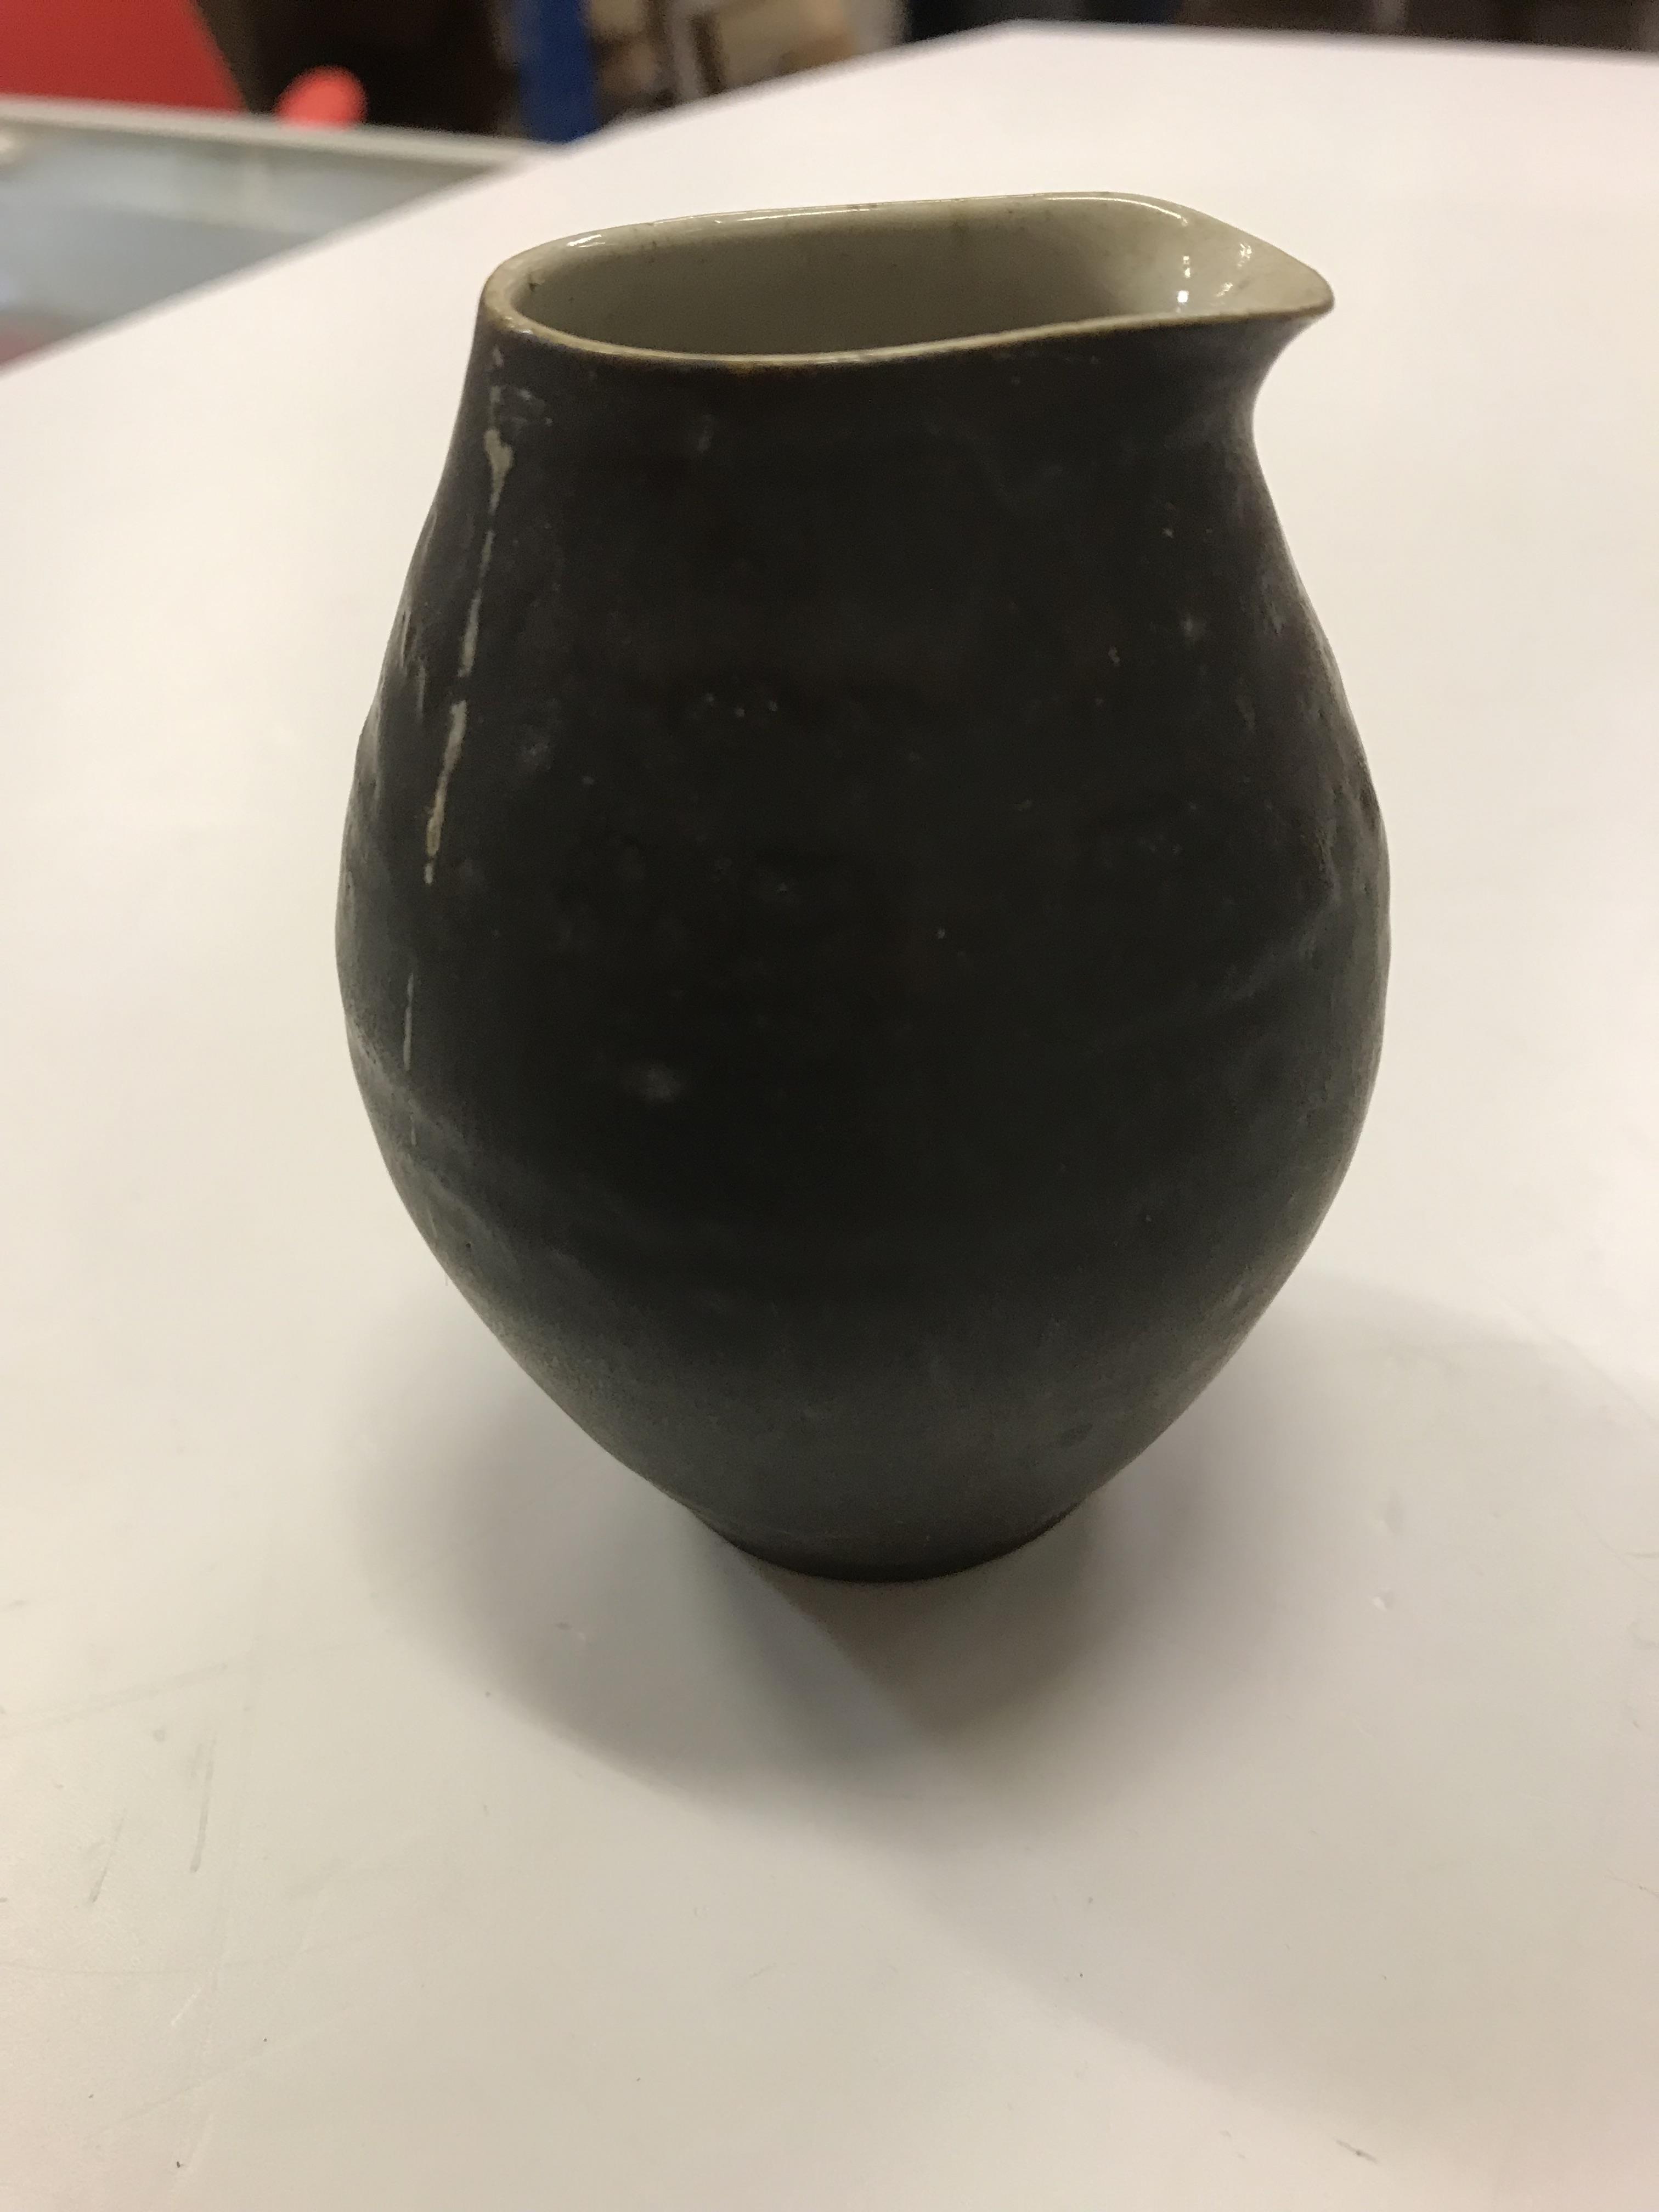 A Lucie Rie pouring vessel, with black glazed exterior and simple design, - Image 6 of 12